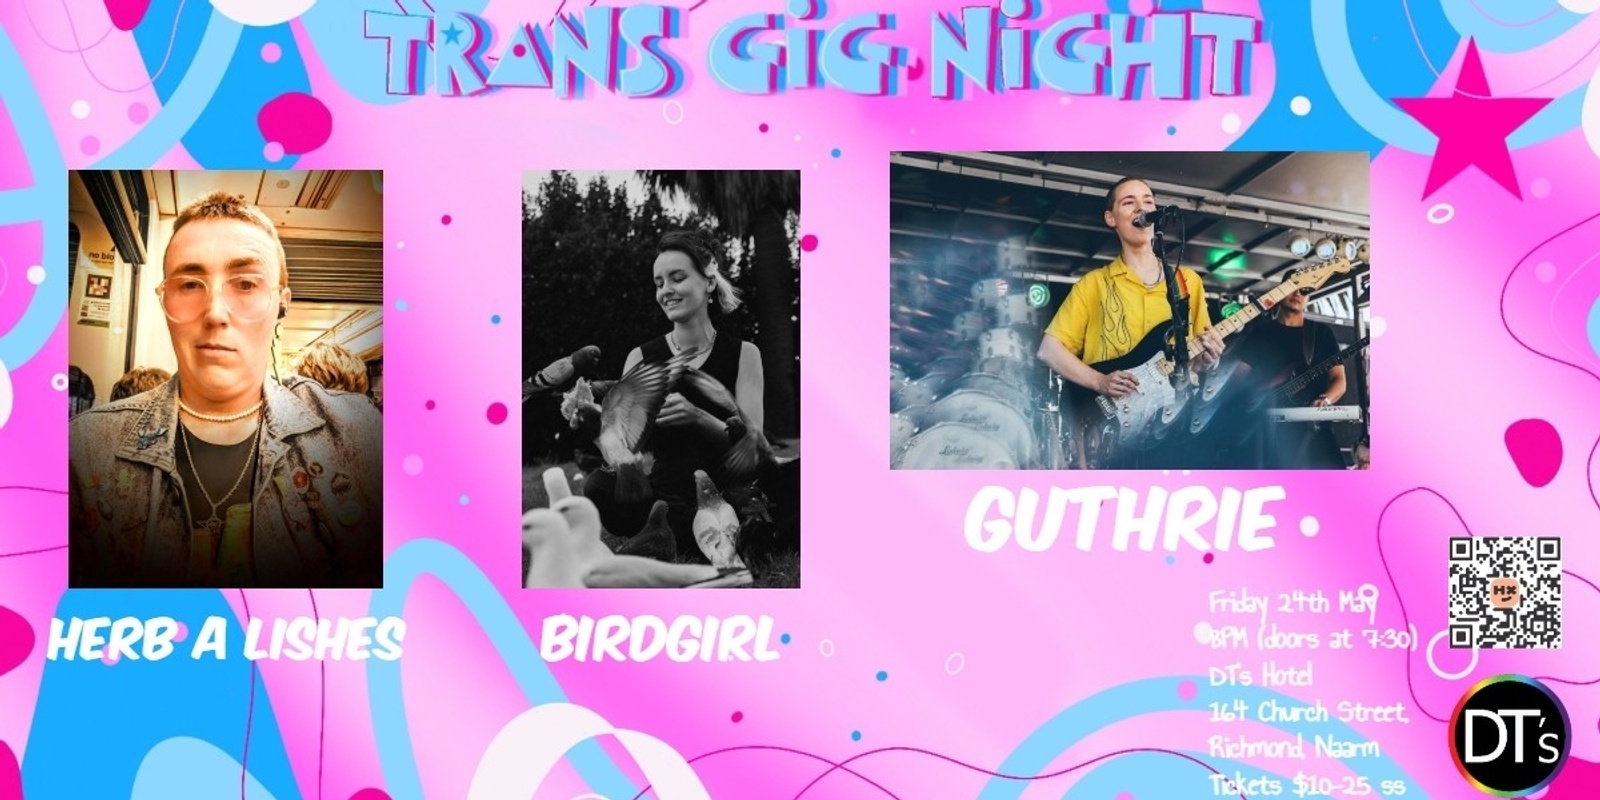 Banner image for TRANS GIG NIGHT- Ft Herb A Lishes, Birdgirl & Guthrie  